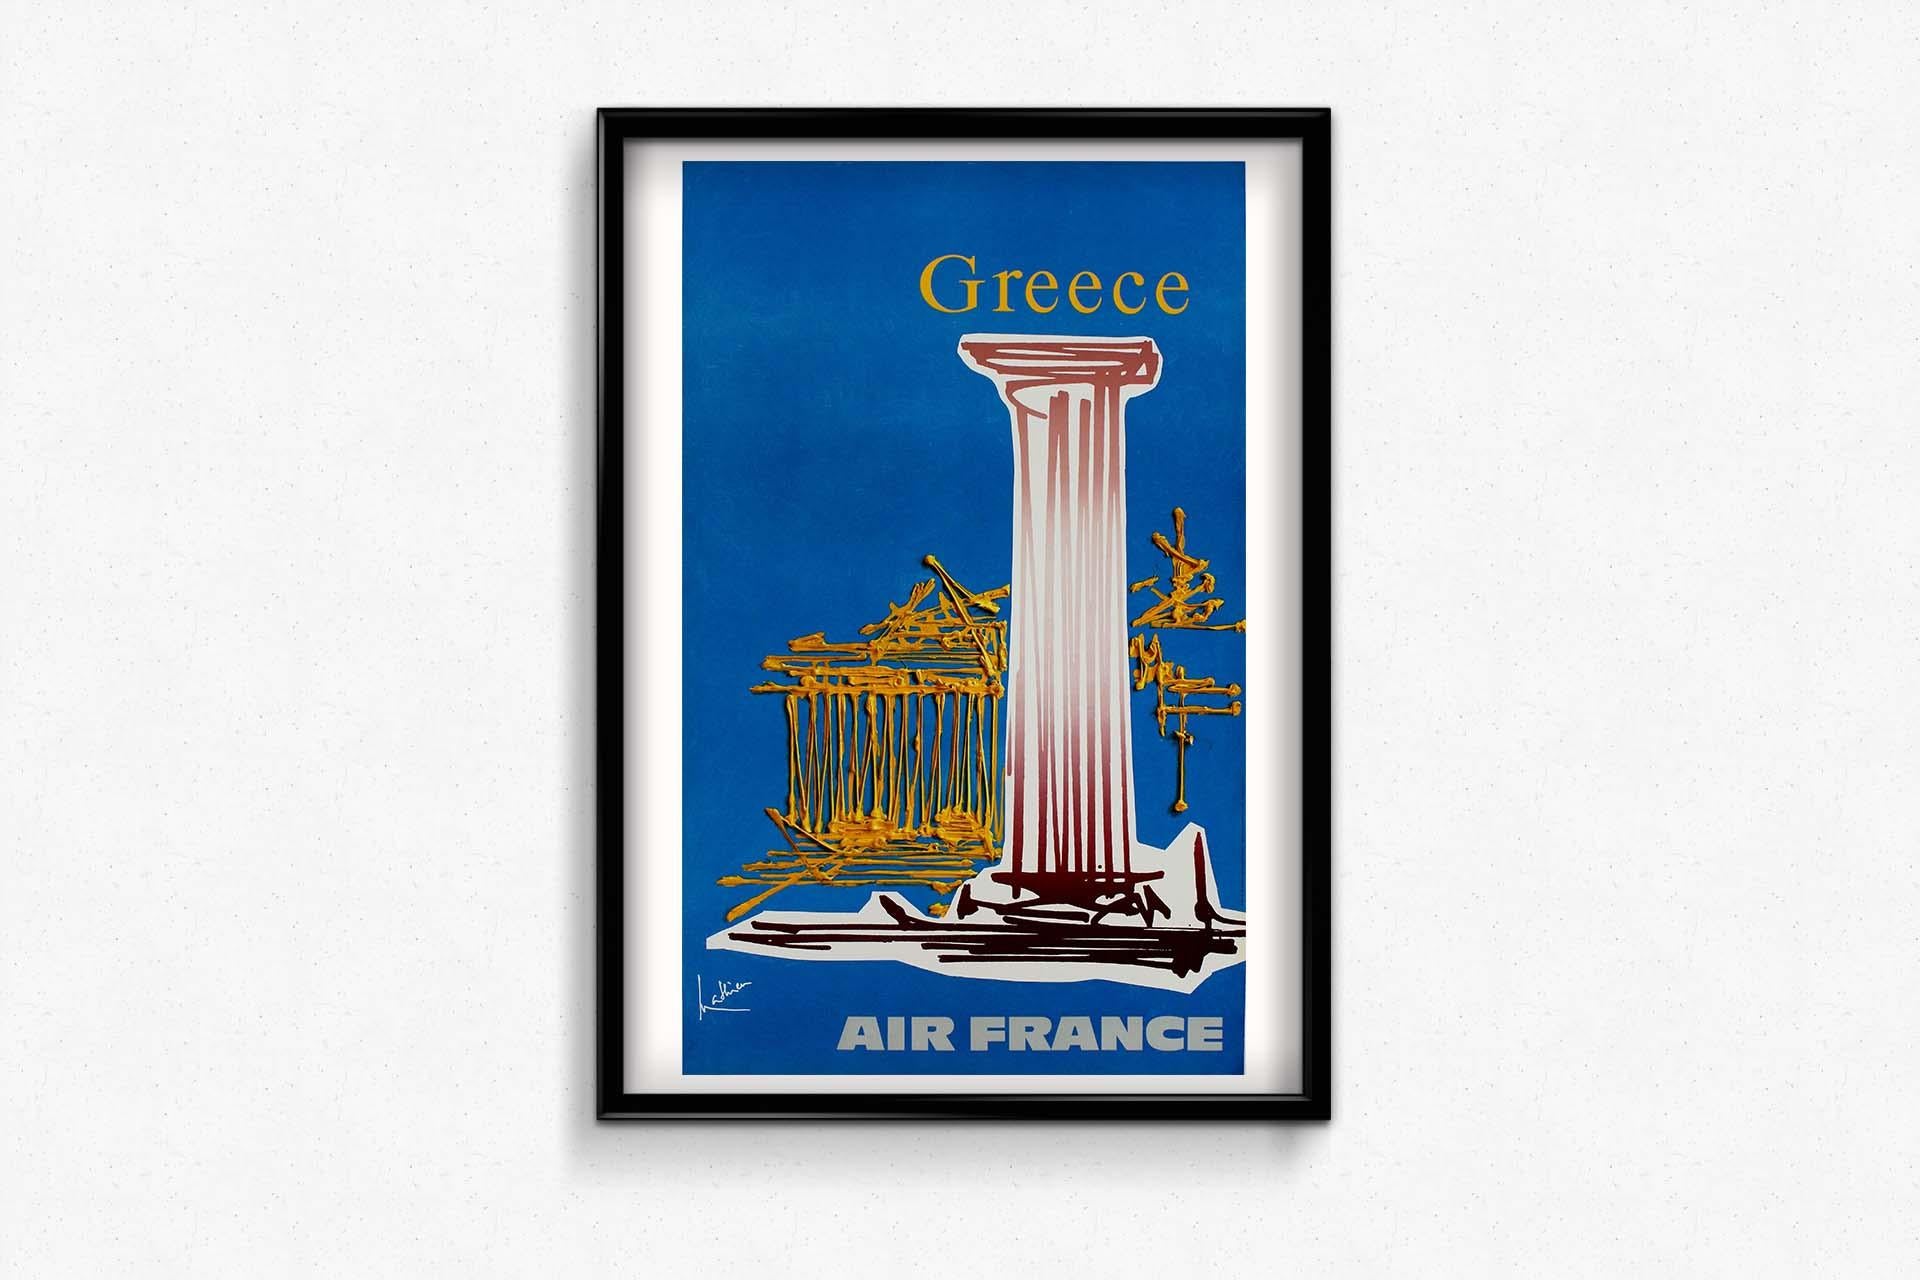 Mathieu's 1967 Air France Grèce poster is a visual masterpiece that beckons us to embark on a journey to the beautiful and historic land of Greece. This iconic poster not only celebrates air travel but also captures the essence of Greece's cultural